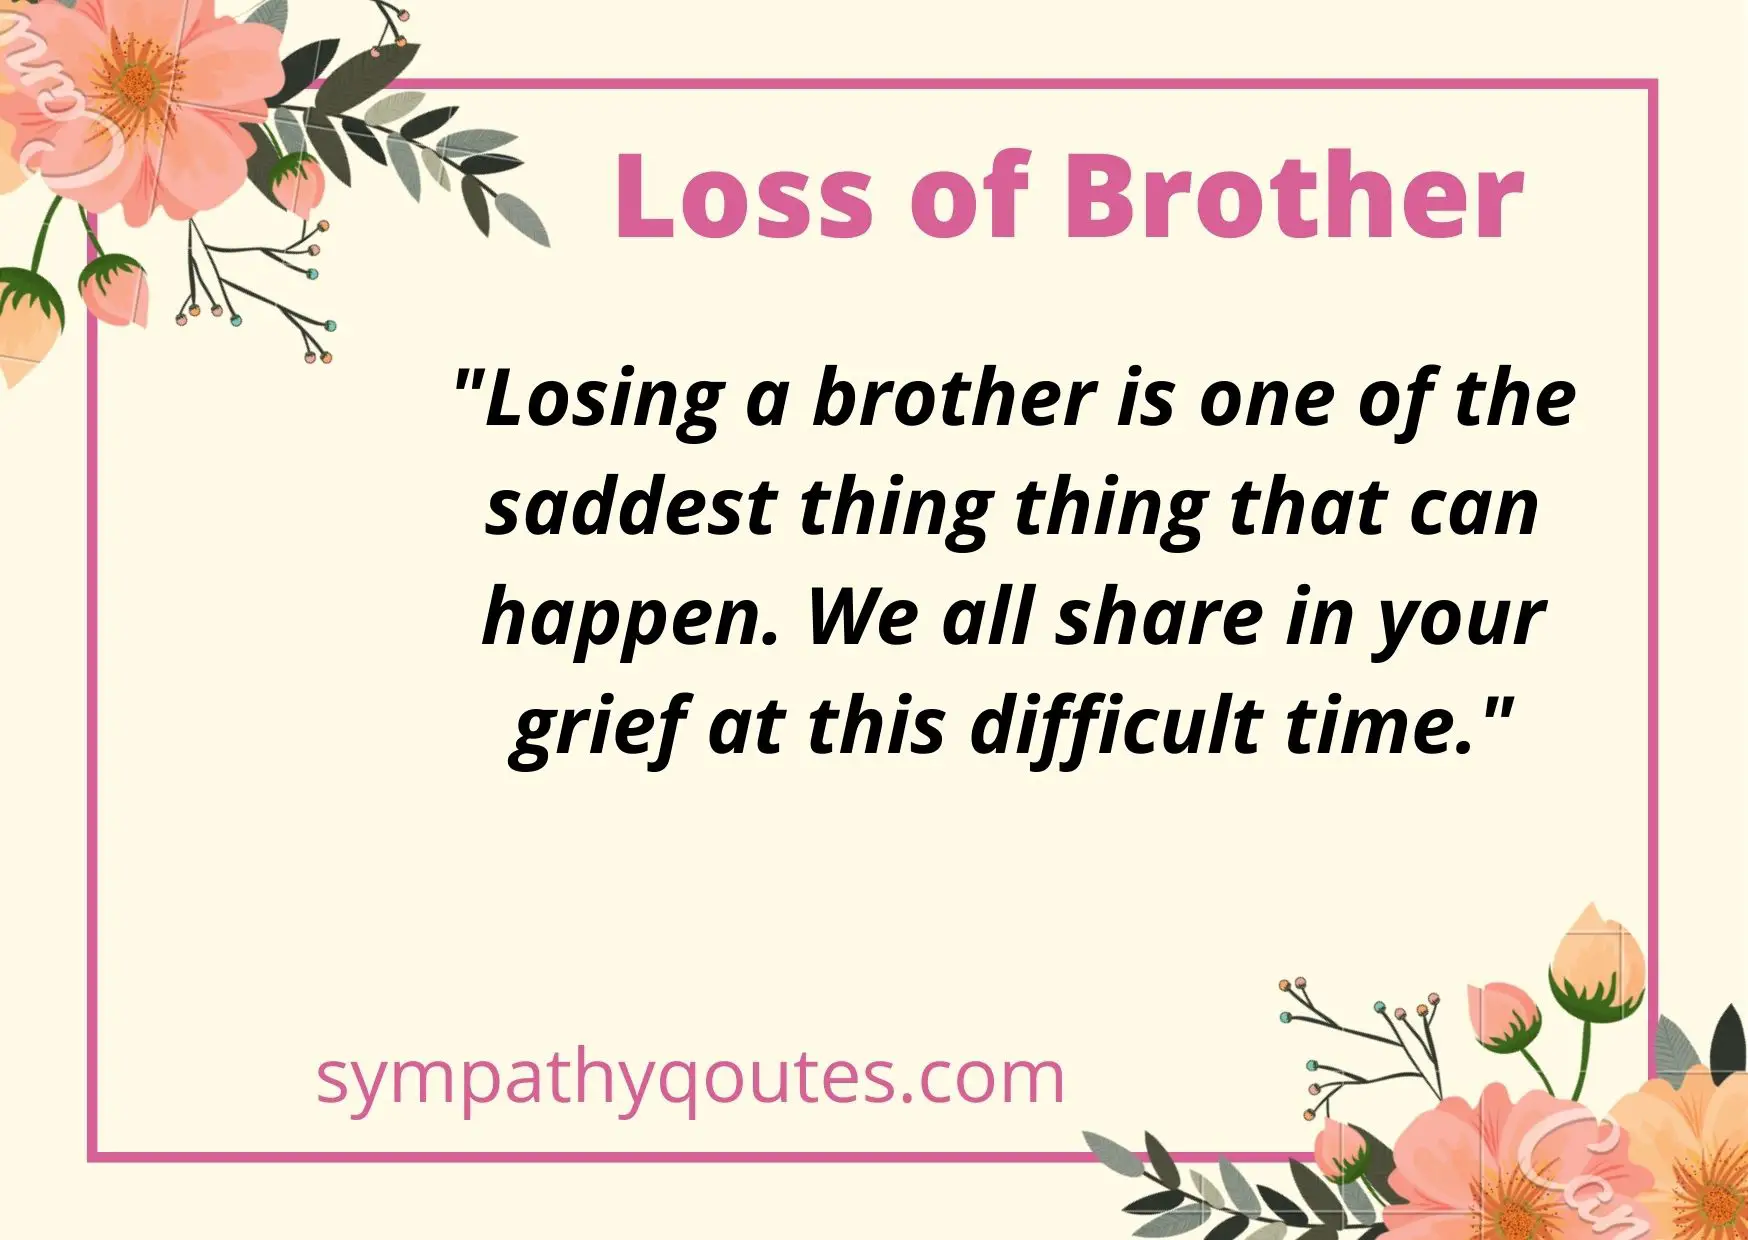 Sympathy Quotes for loss of Brother